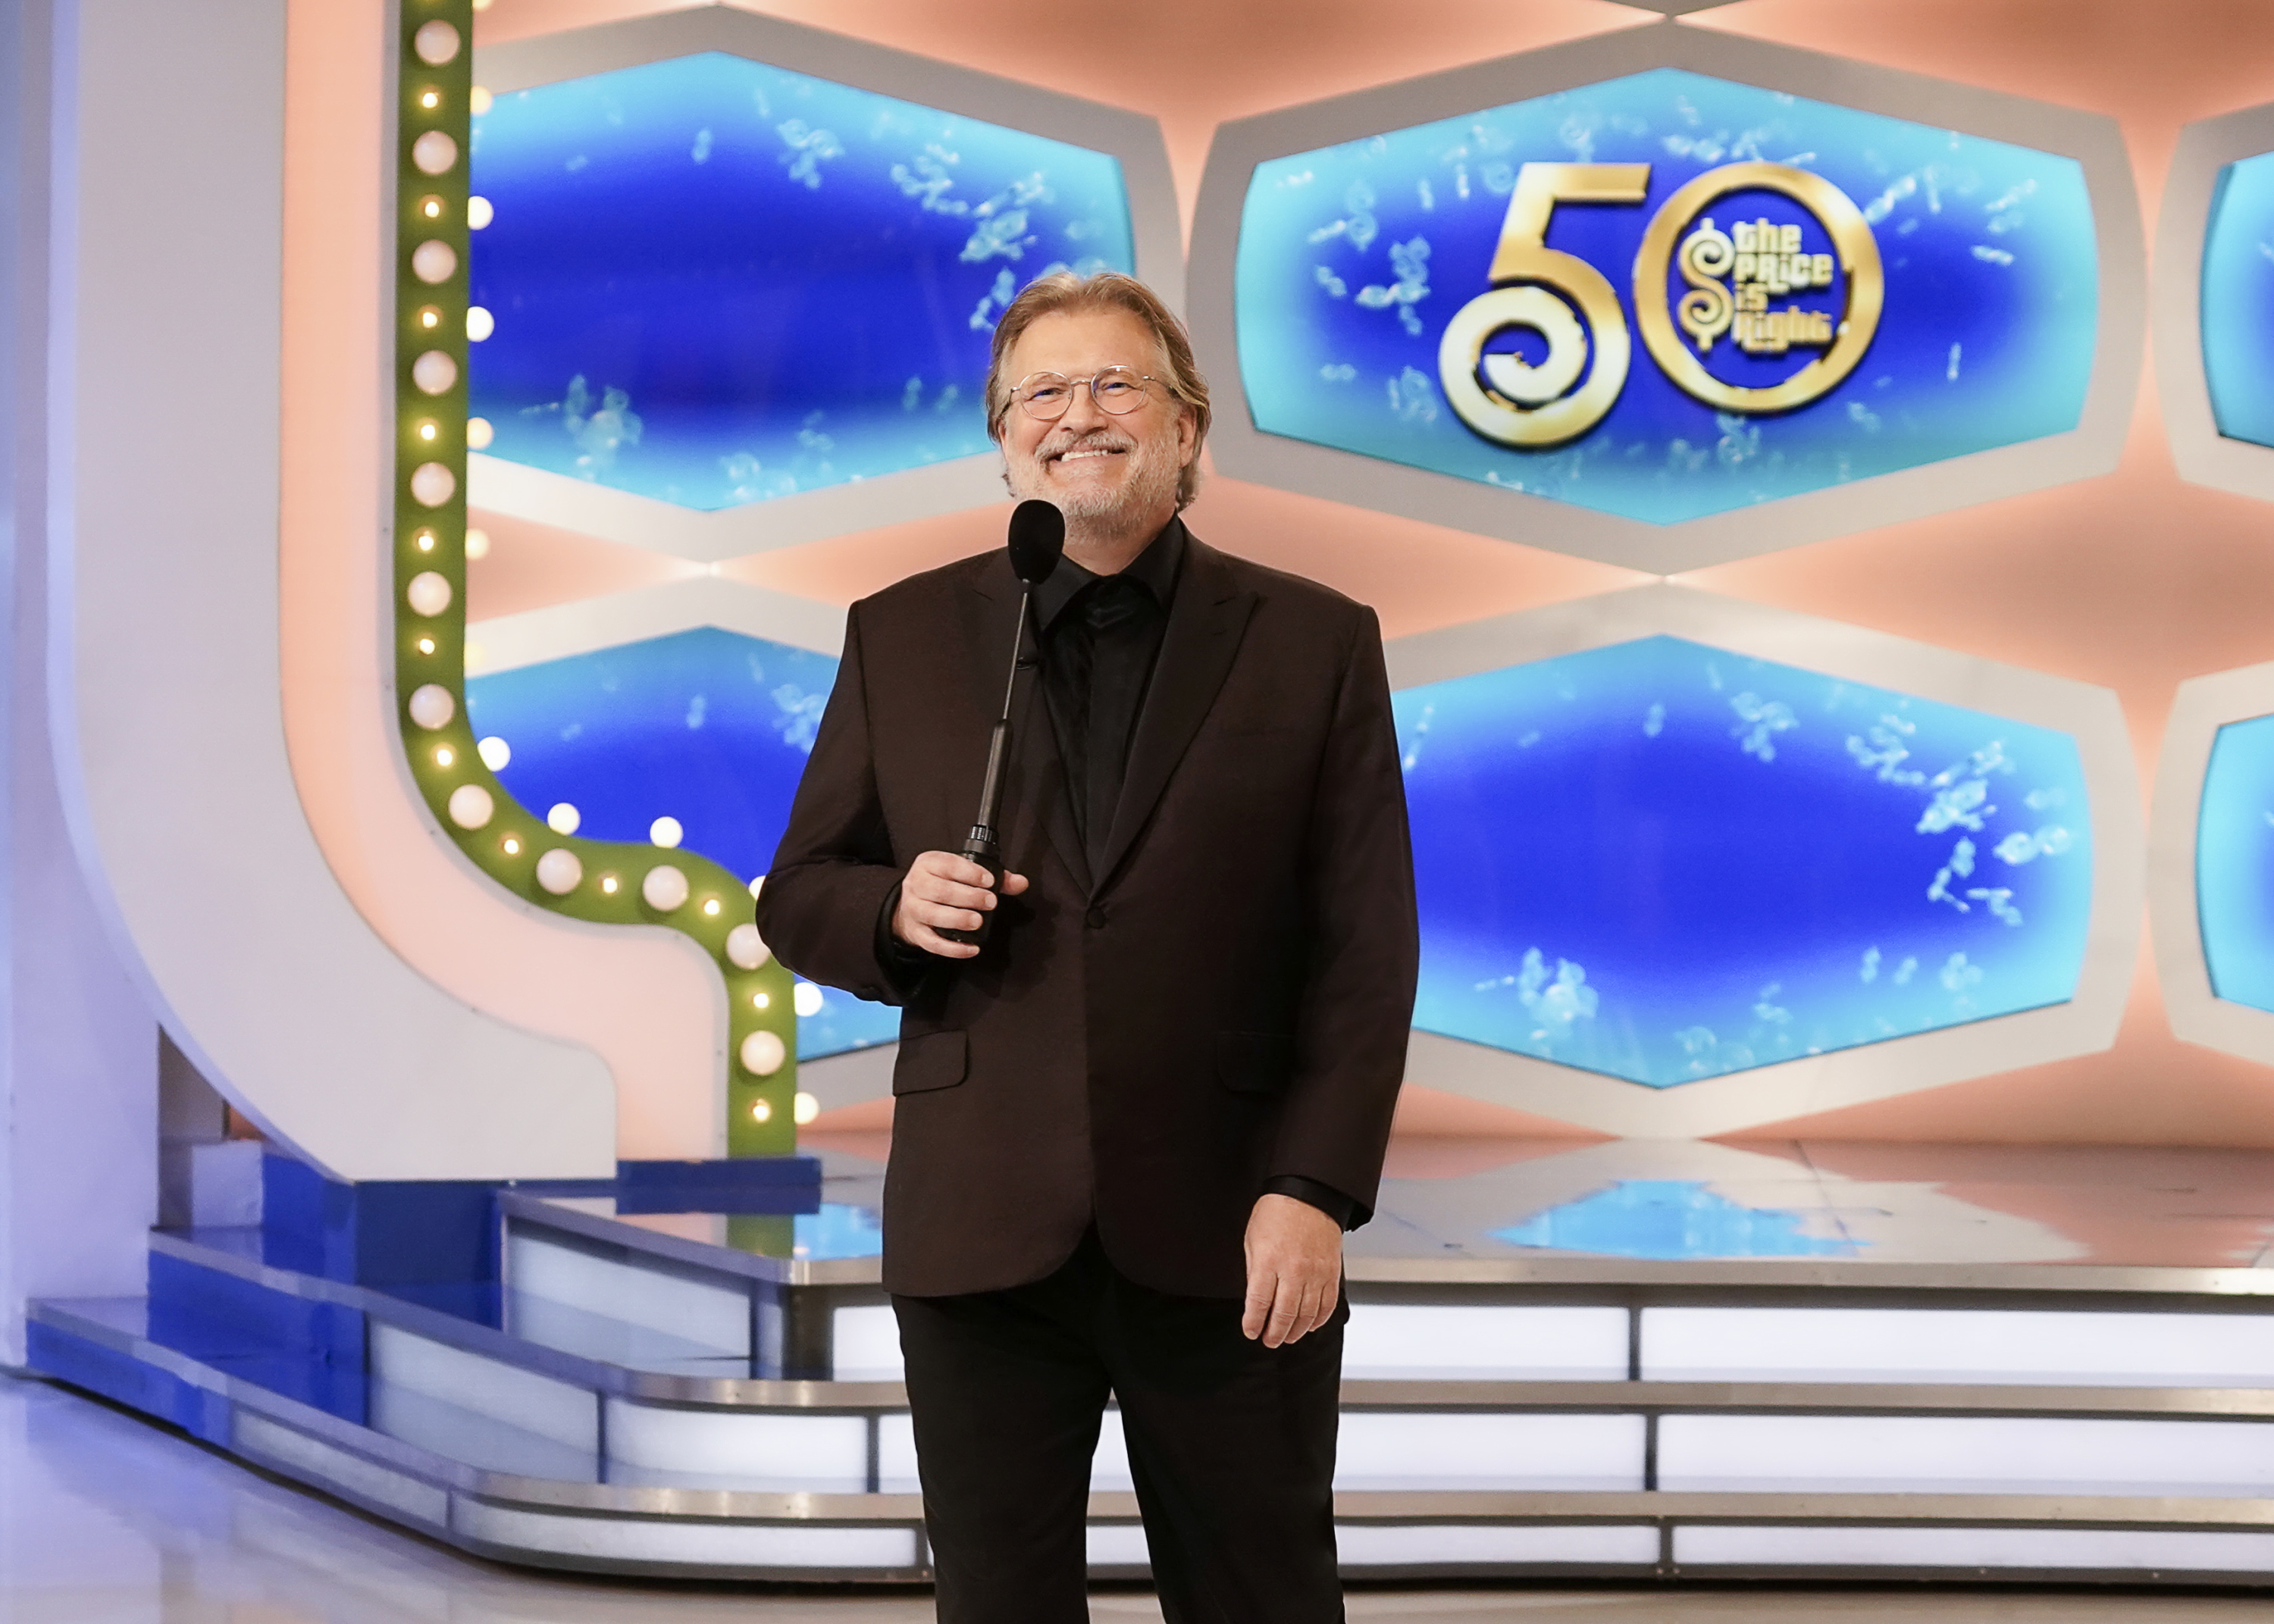 Drew Carey Compares Hosting ‘The Price Is Right’ To The Washington Monument: ‘Taking Care Of This Old Thing That People Treasure’